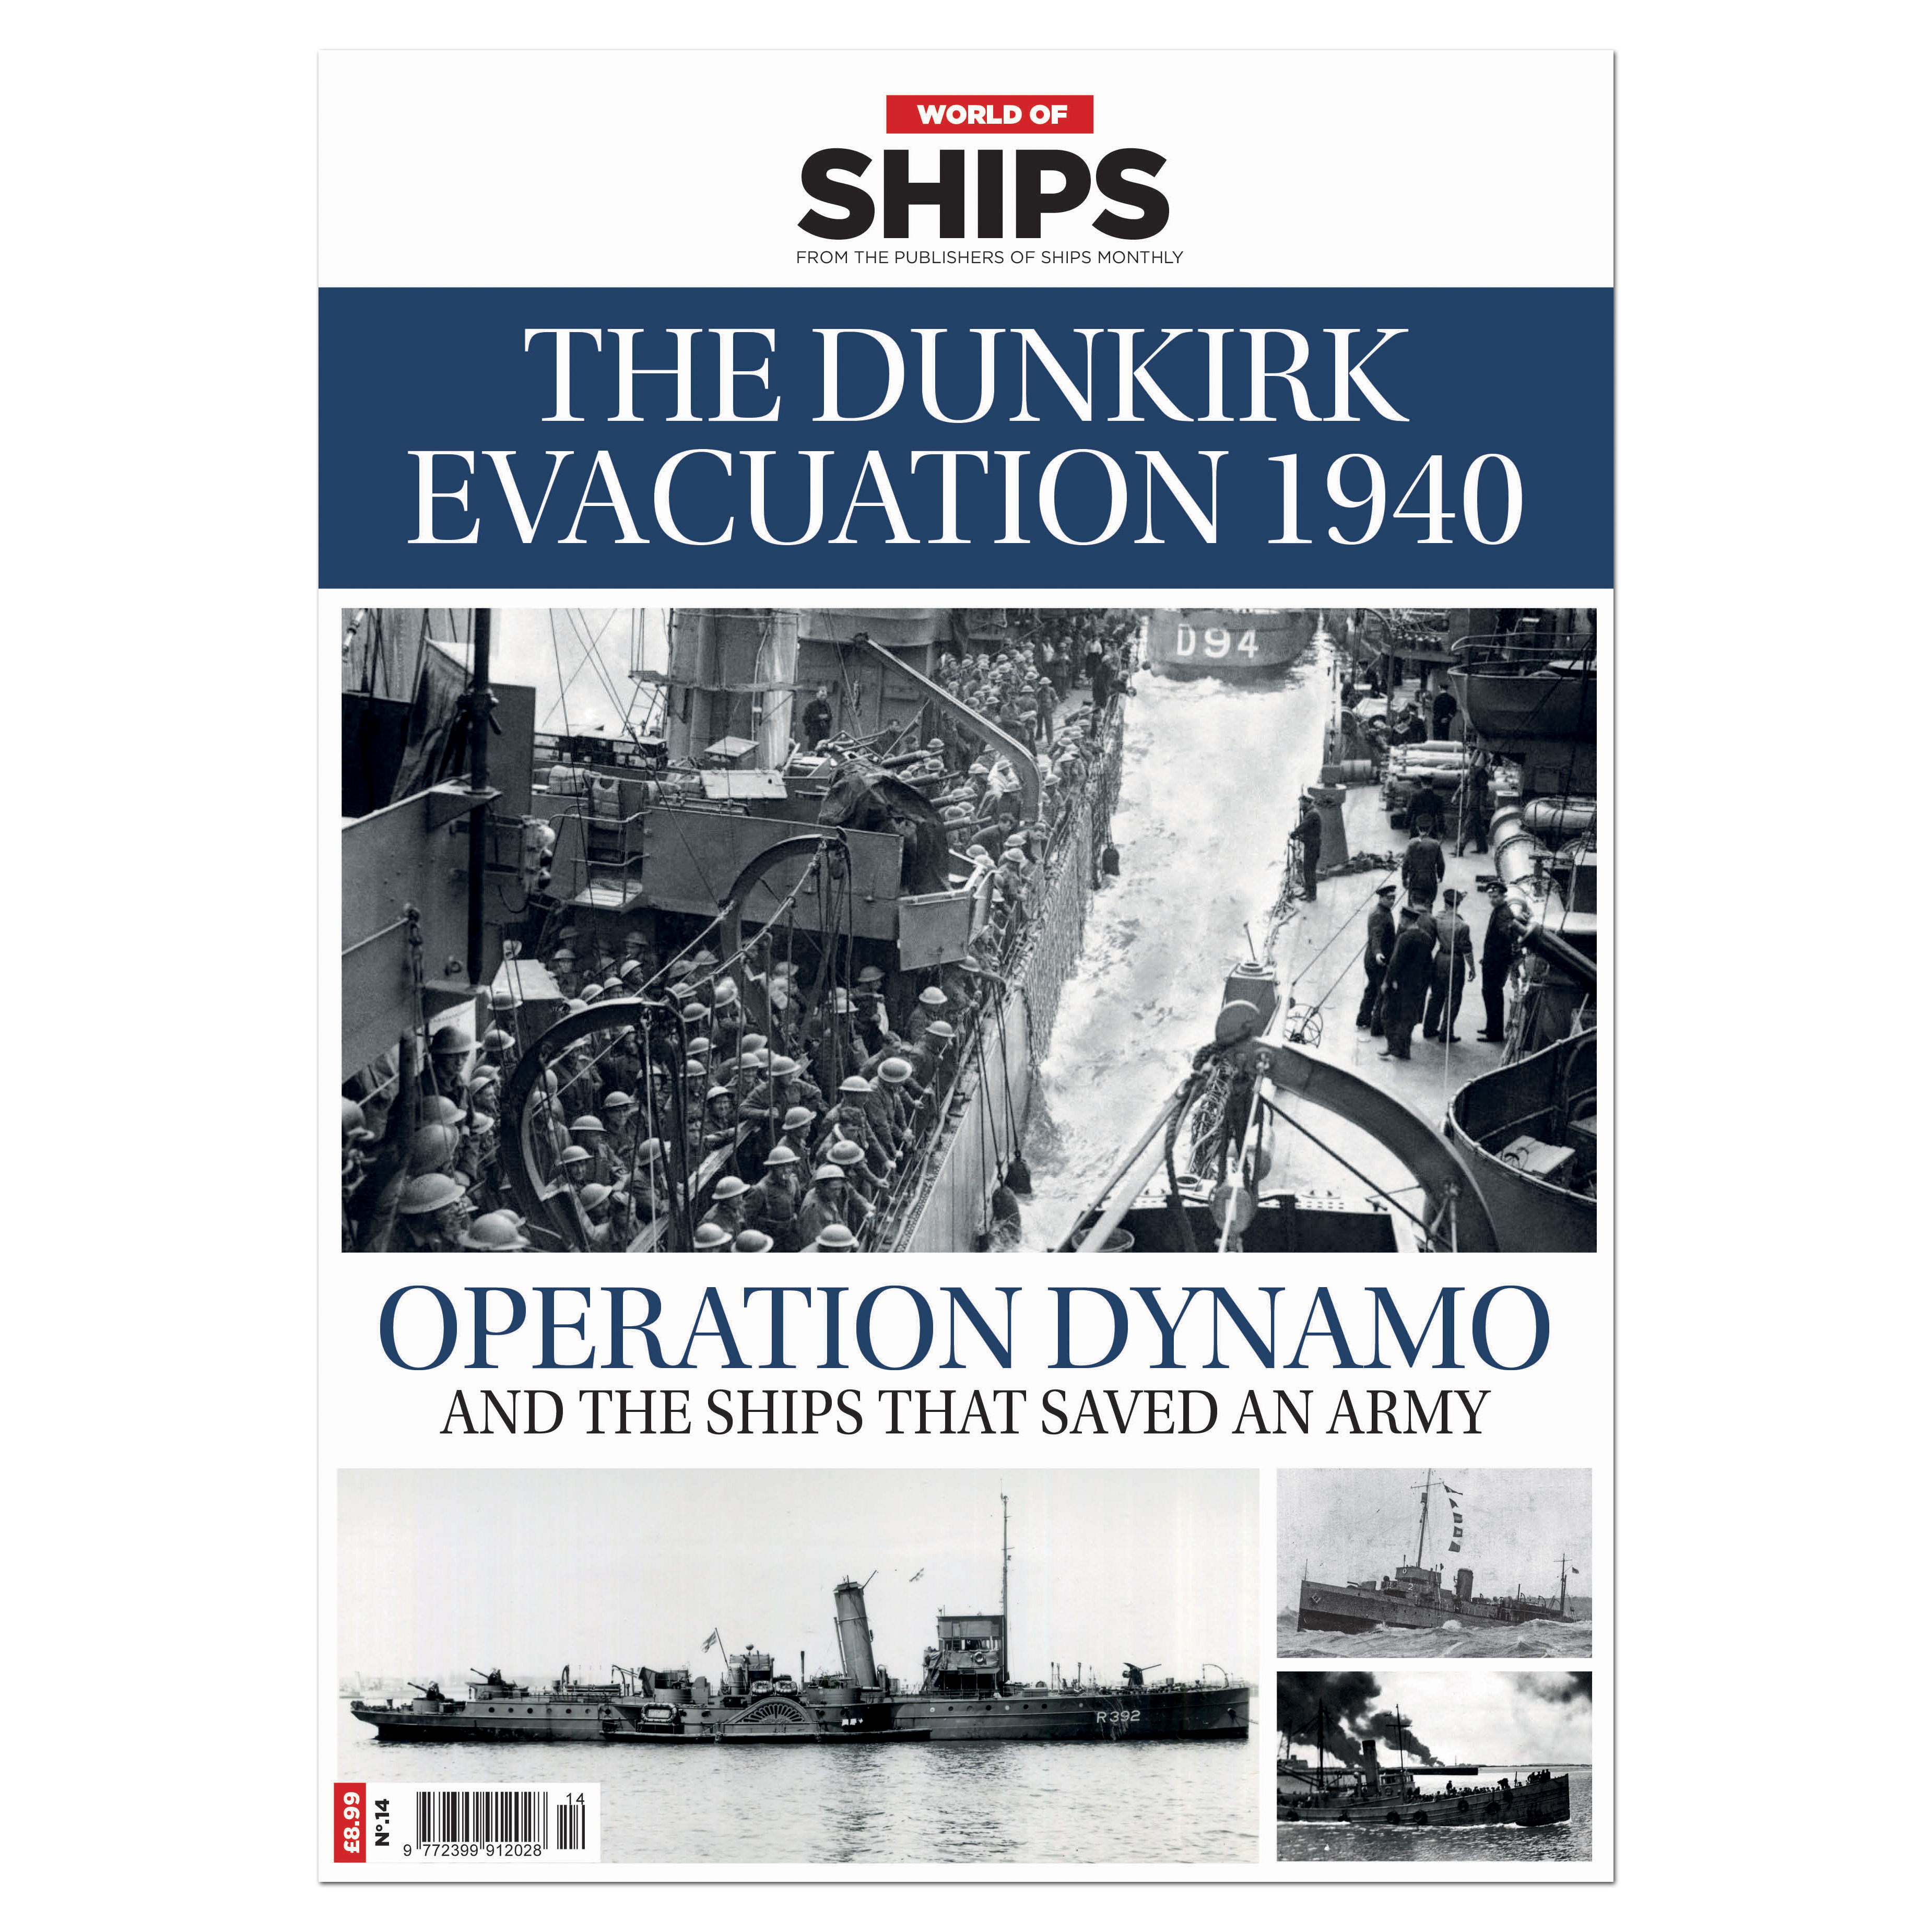 World of Ships #14 - Operation Dynamo: Dunkirk 80 years on